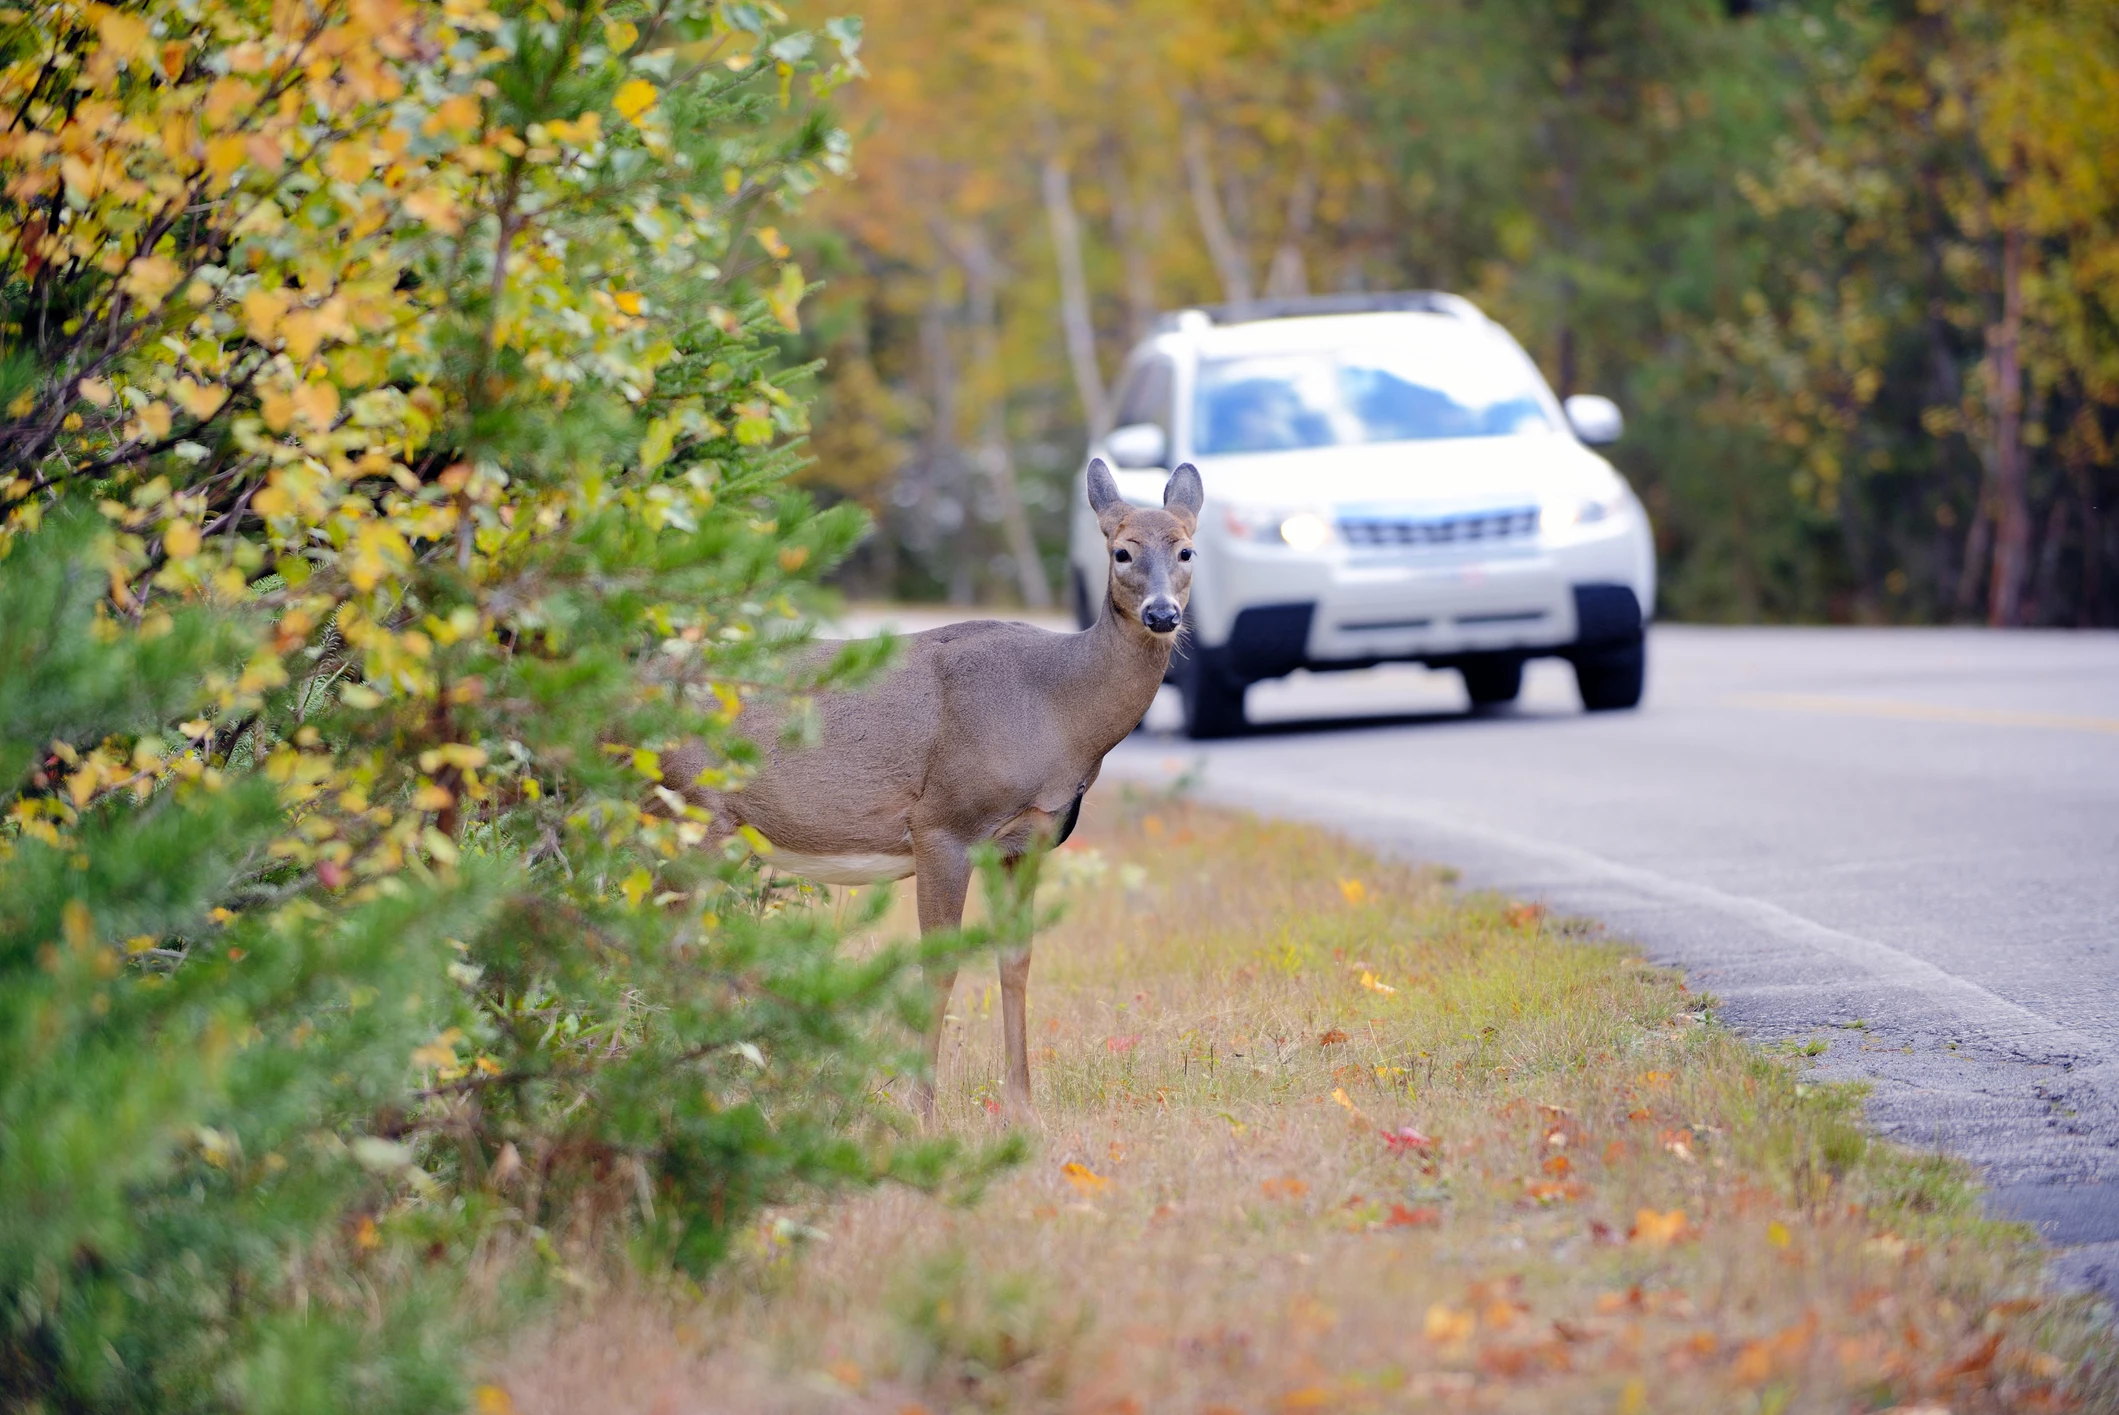 NY Advises What You Should Do When Encountering A Wild Animal